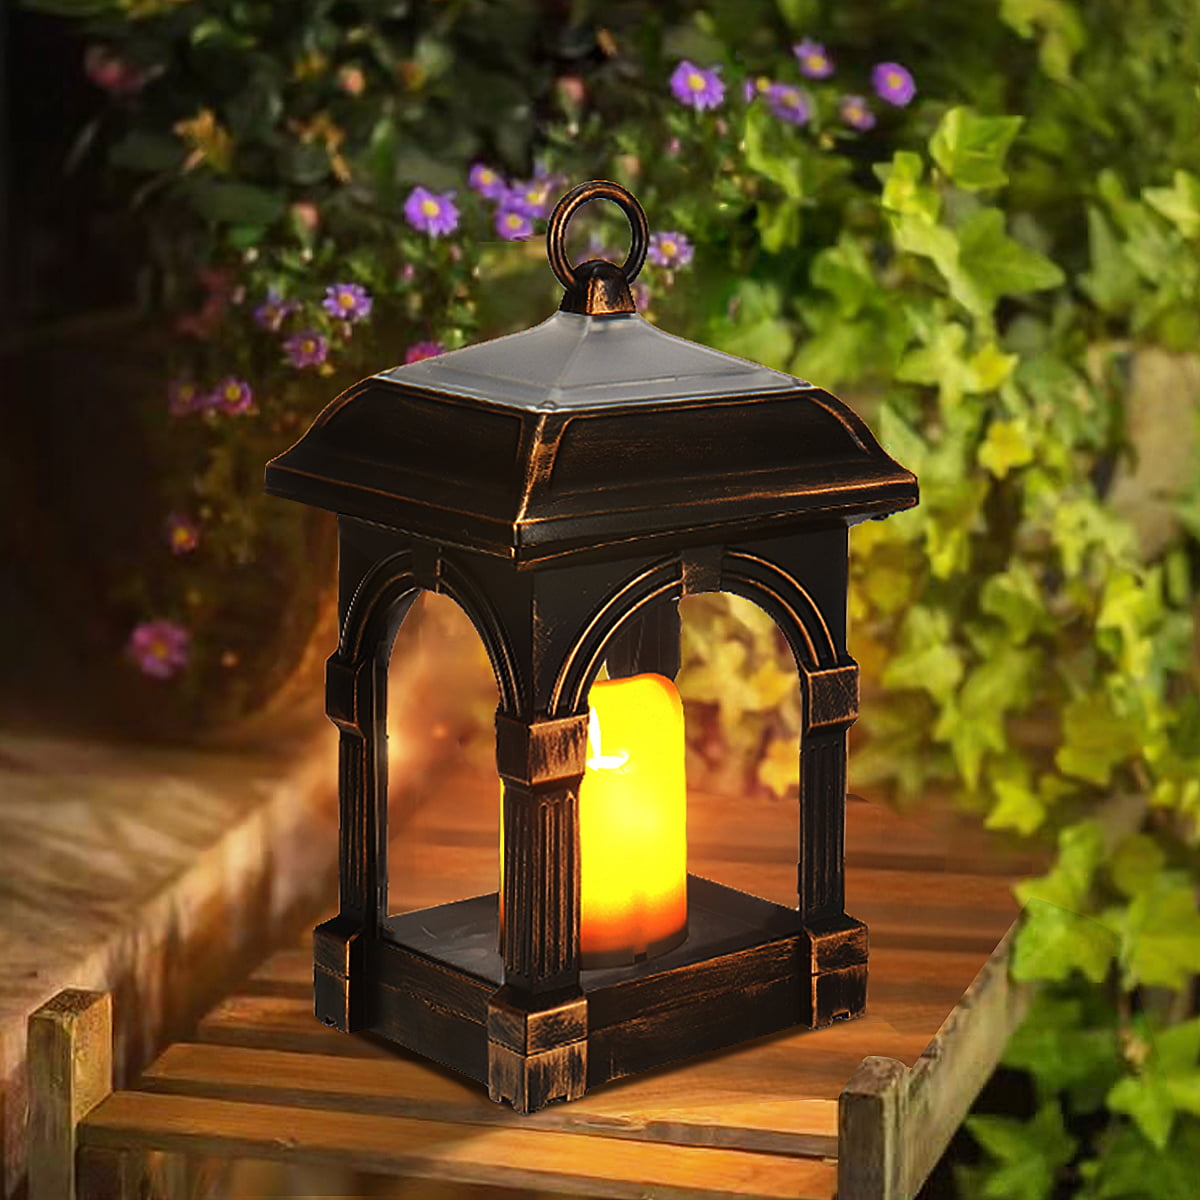 Plastic LED Flameless Candles Flickering Lights Waterproof Decorative Light for Porch Yard Lawn Patio Courtyard Solar Lantern Outdoor Garden Hanging Lamps